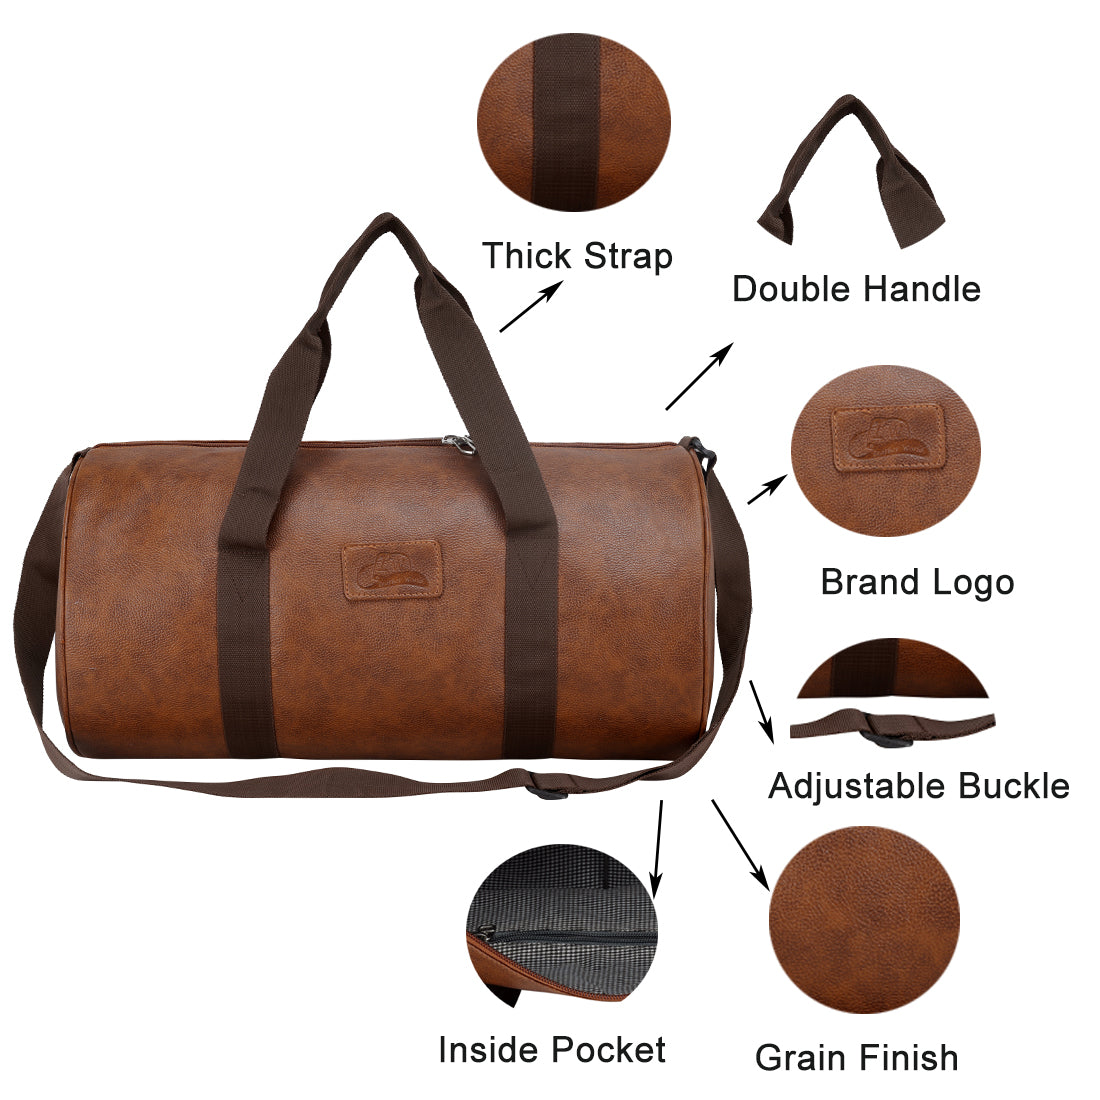 Buy Rustic Town Handmade Brown Leather Travel Duffel Bag - Airplane  Underseat Carry On Bags (Medium) at Amazon.in